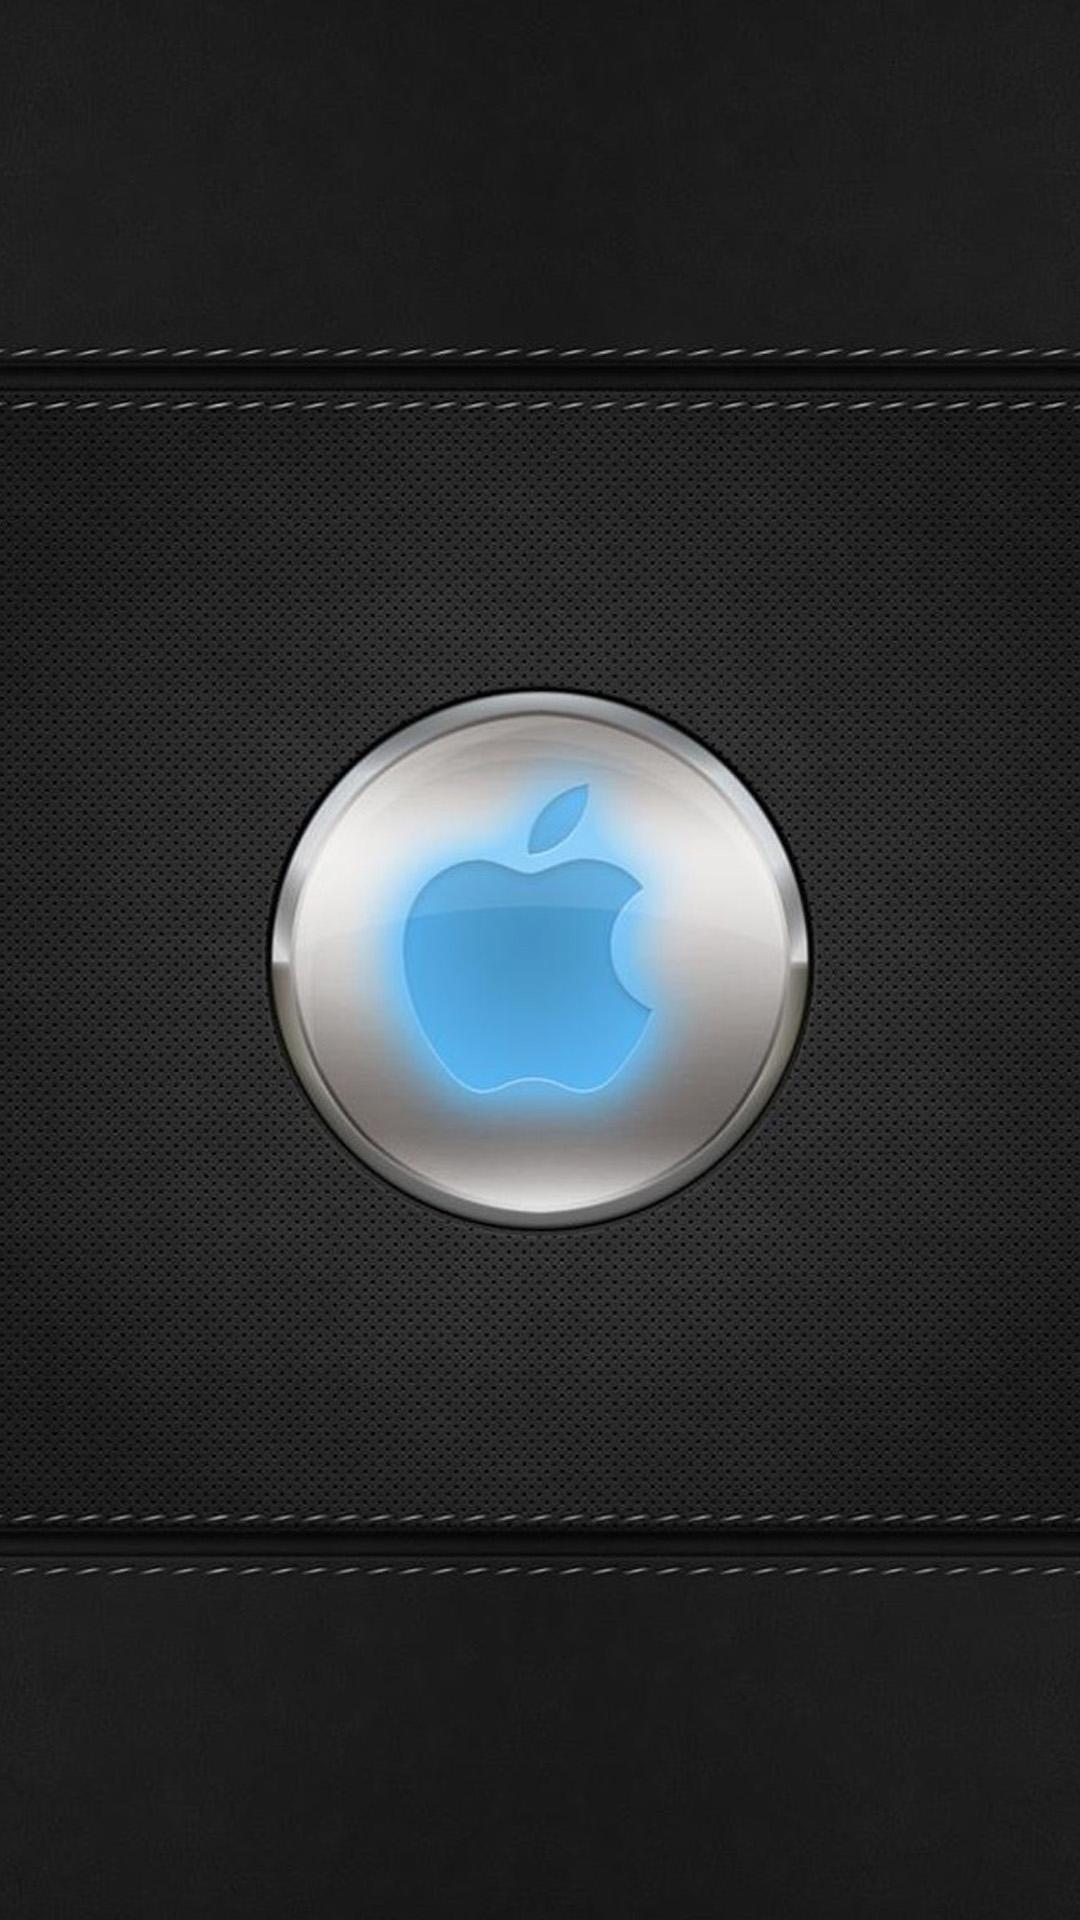 Apple Logo Wallpaper For iPhone Free Download